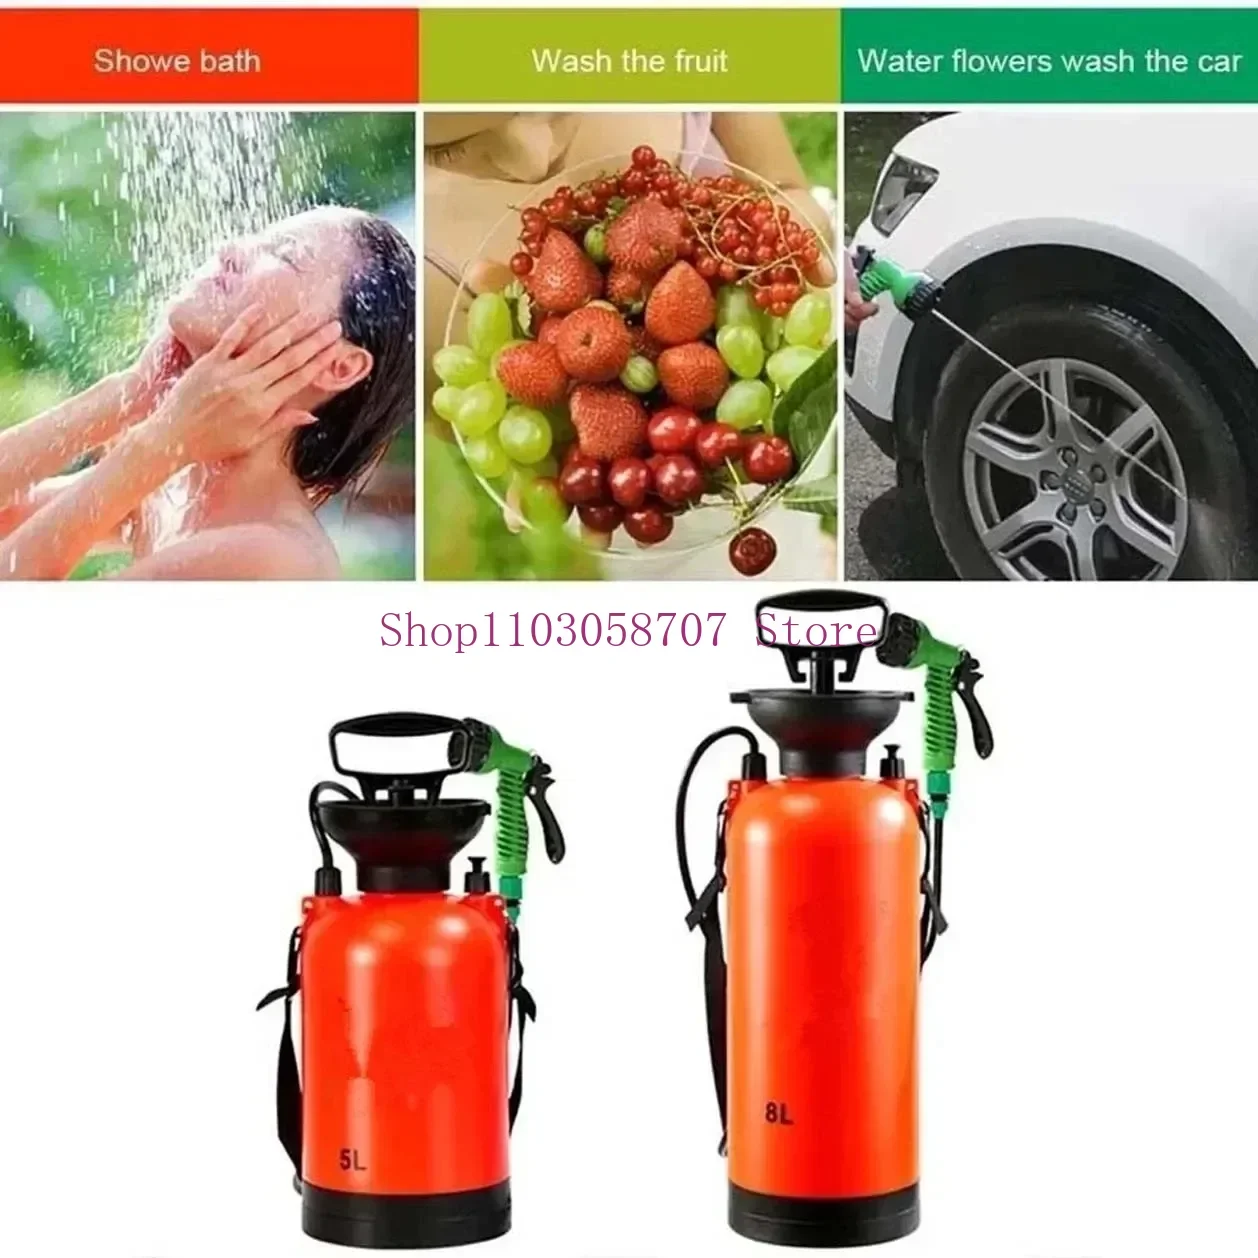 

NEW 5/8L Car Washing Small Sprayer Portable Outdoor Camping Shower Multi-Function Bath Sprayer Watering Flowers for Travel